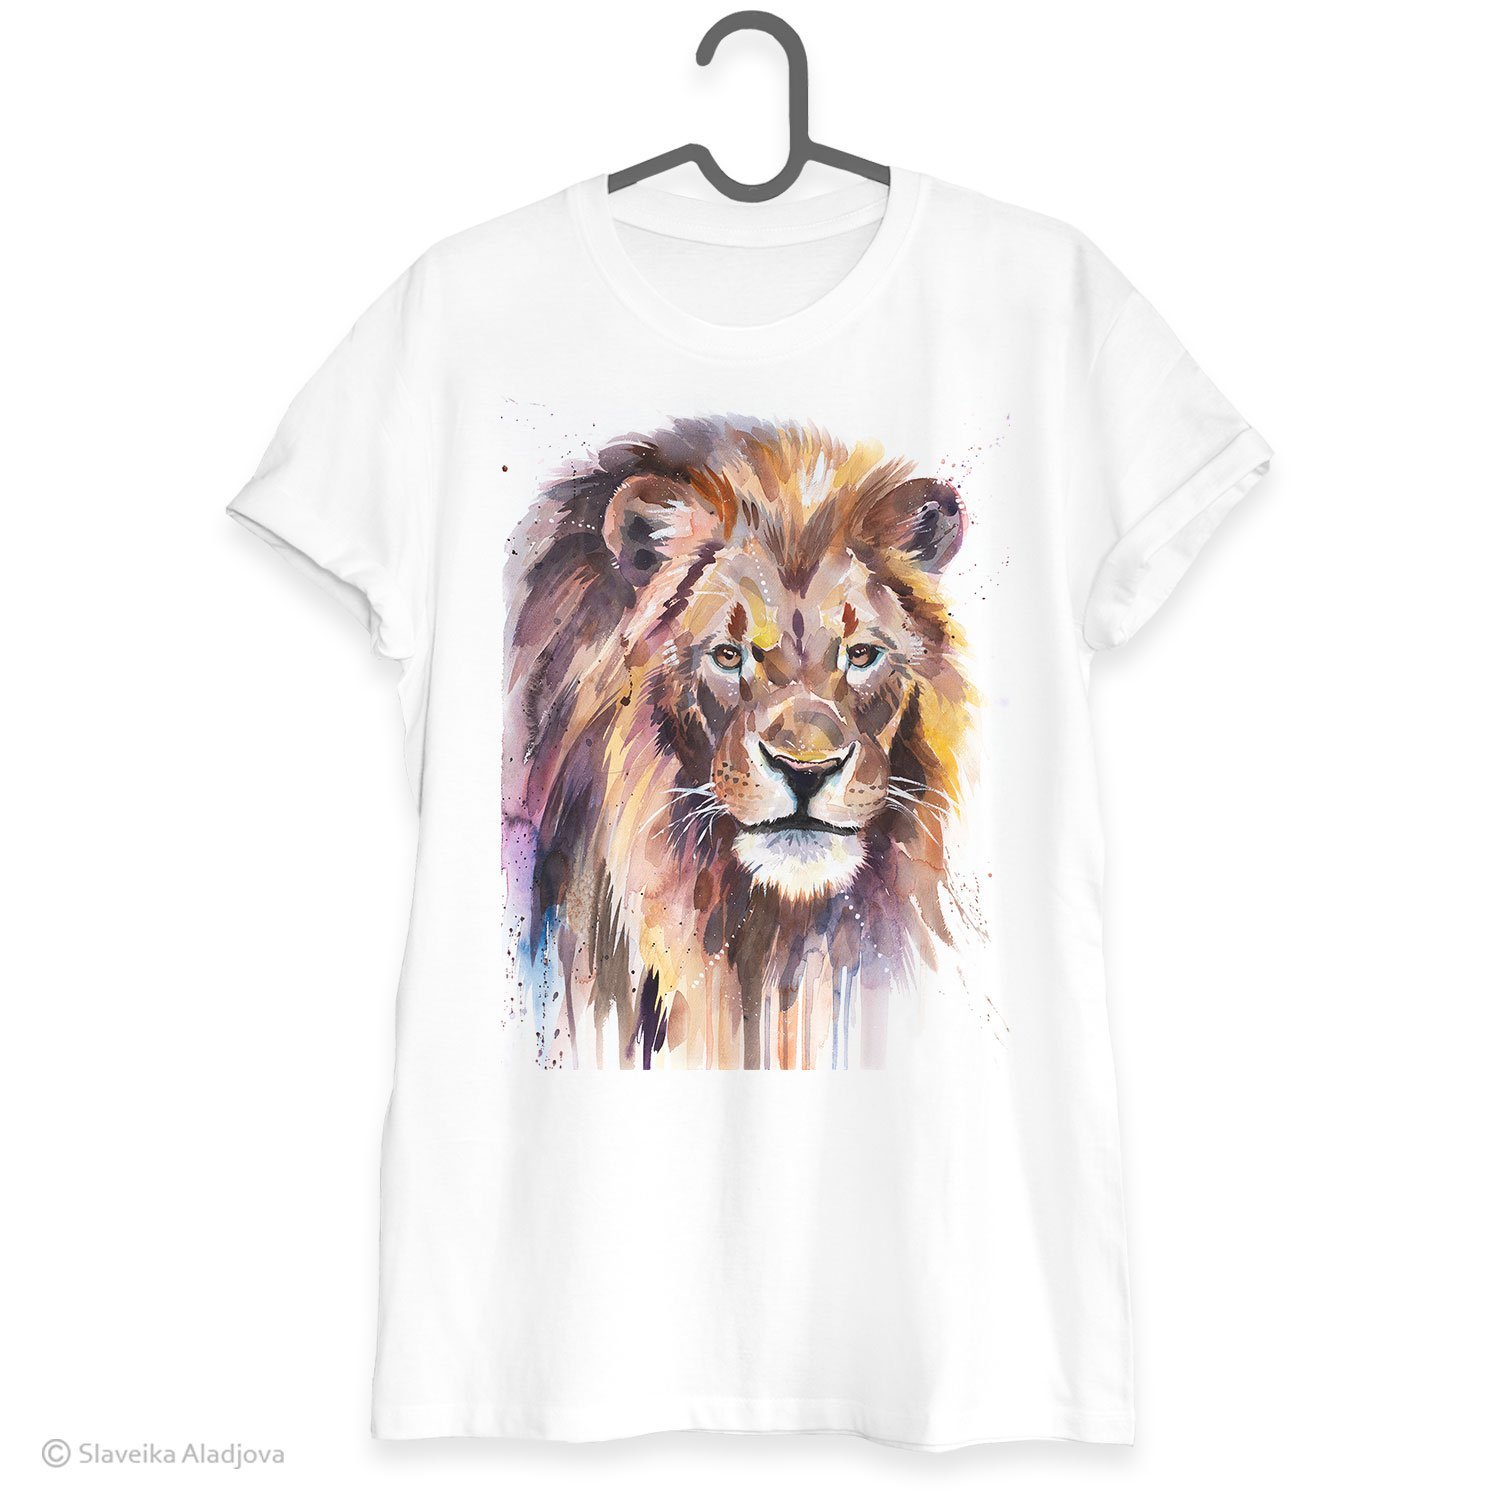 Smooth Lion T-Shirt – Acquires